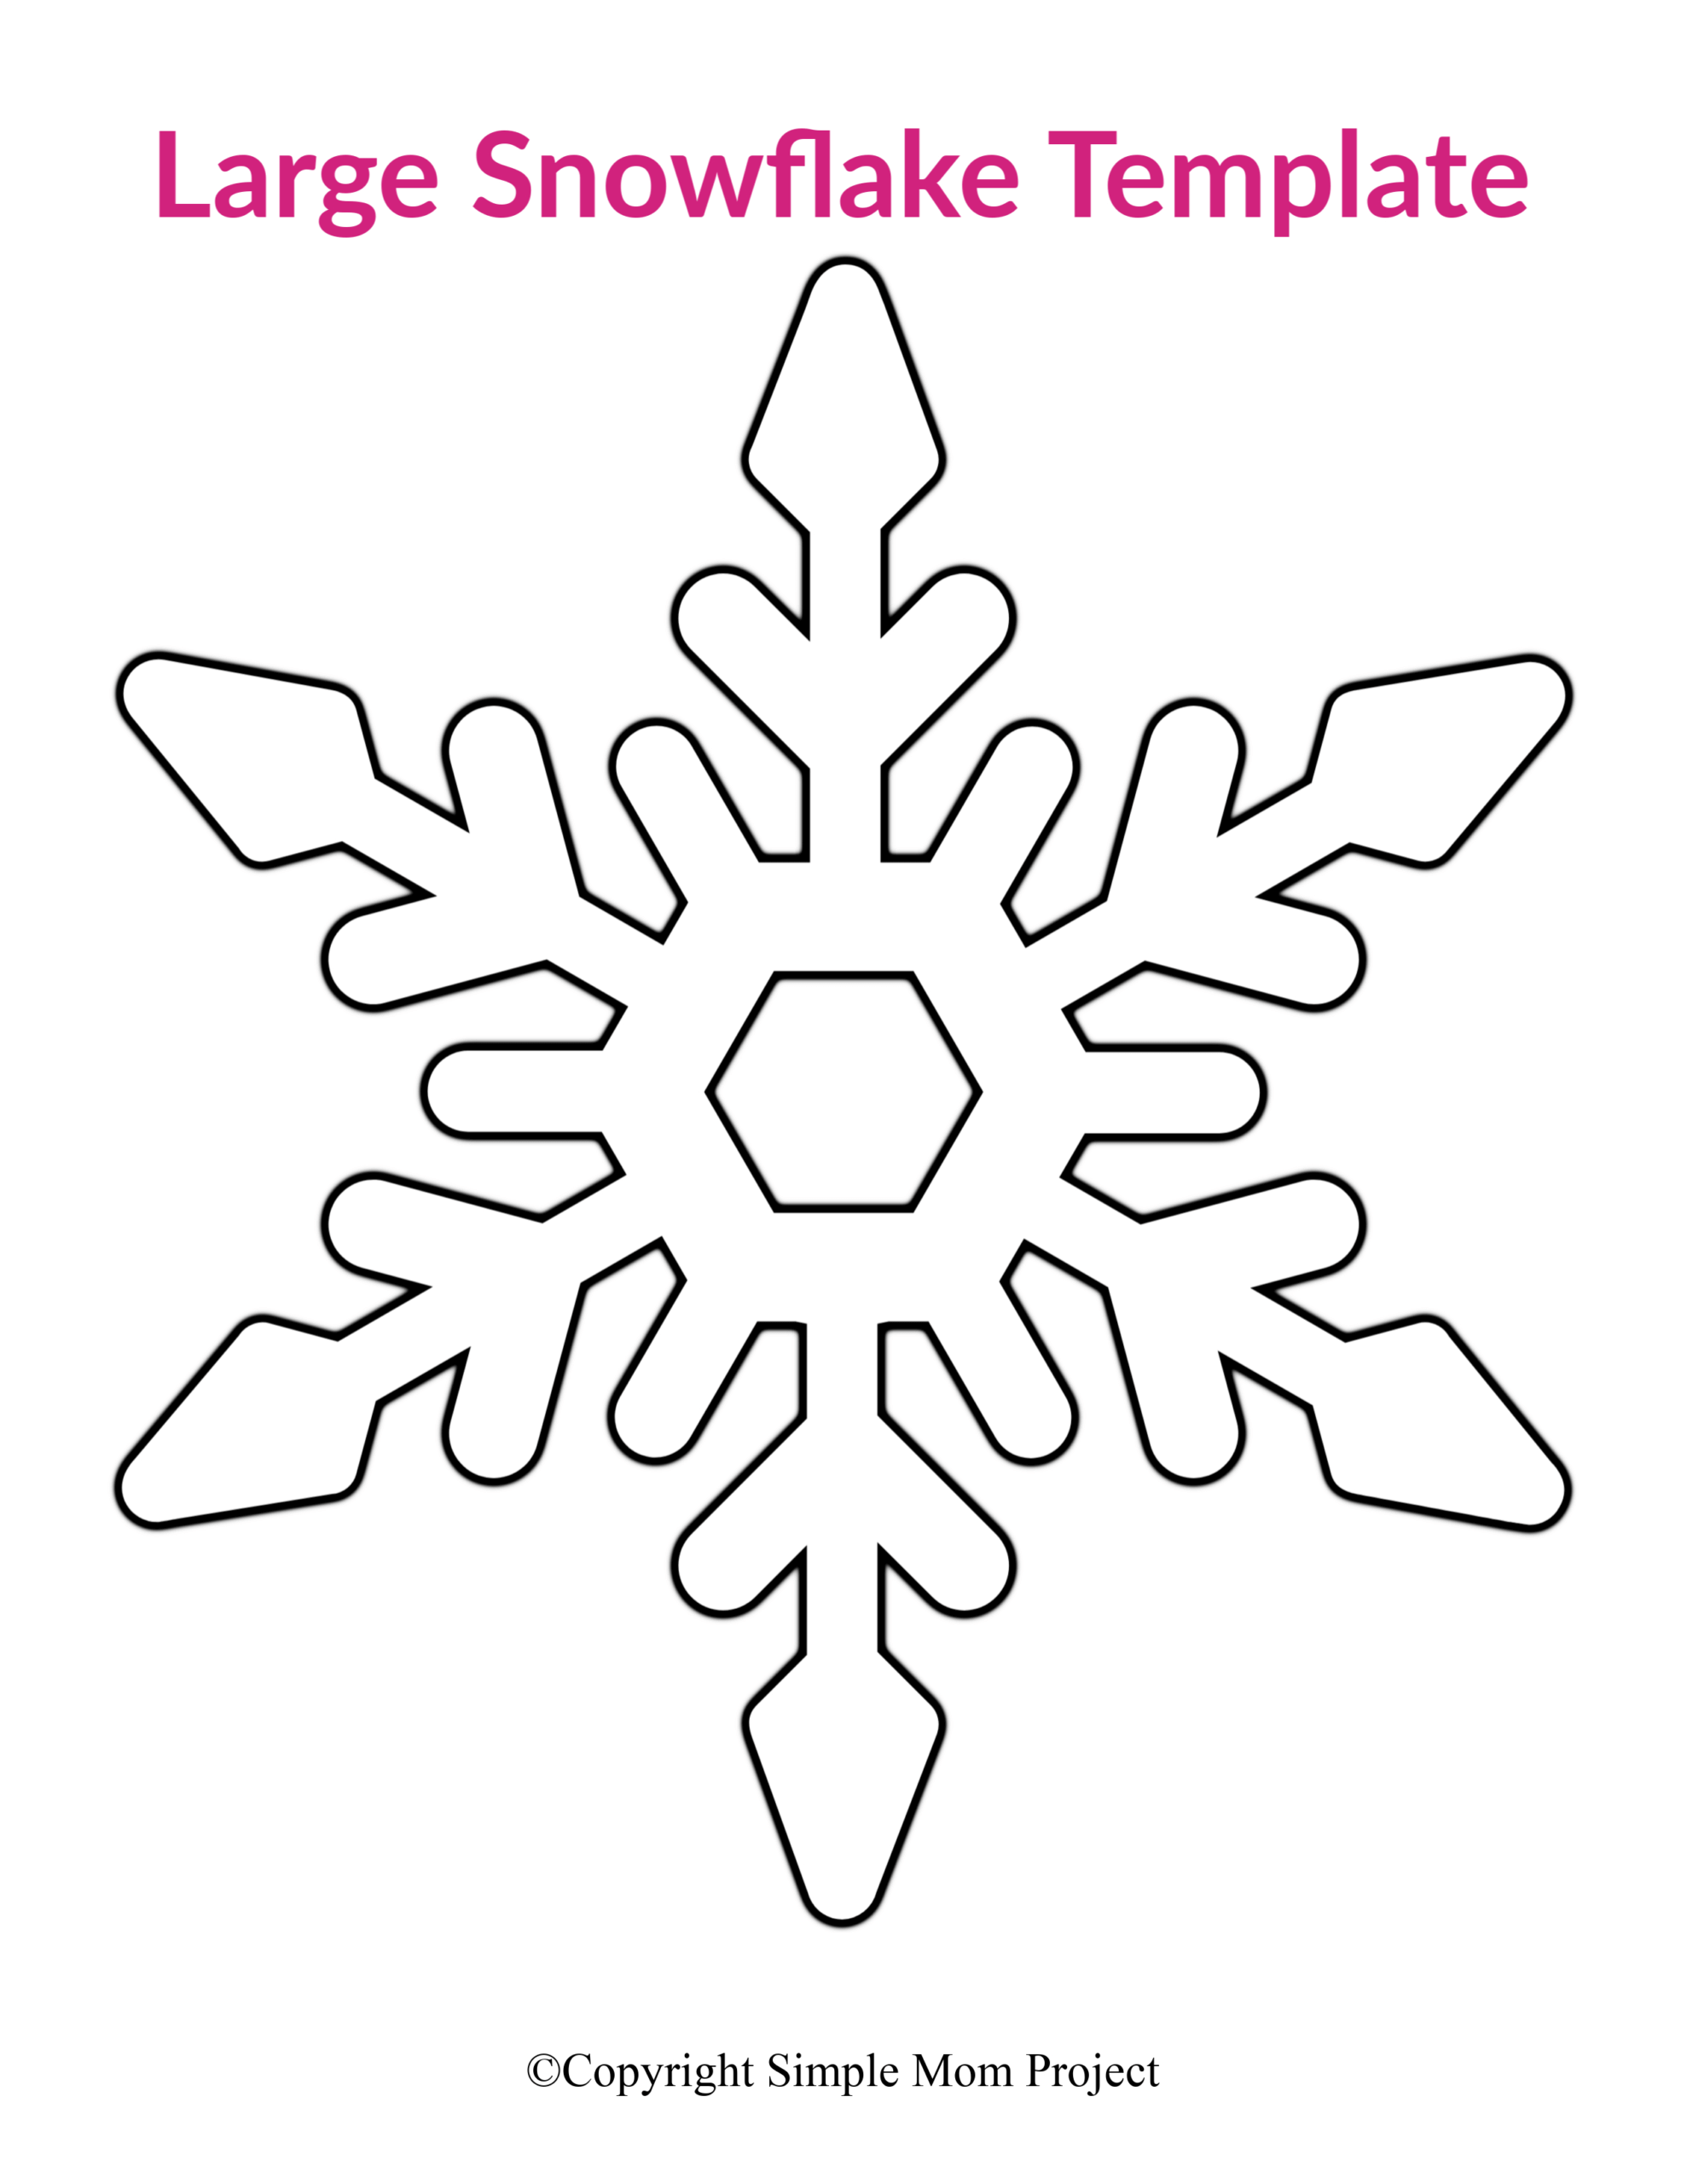 8-free-printable-large-snowflake-templates-simple-mom-project